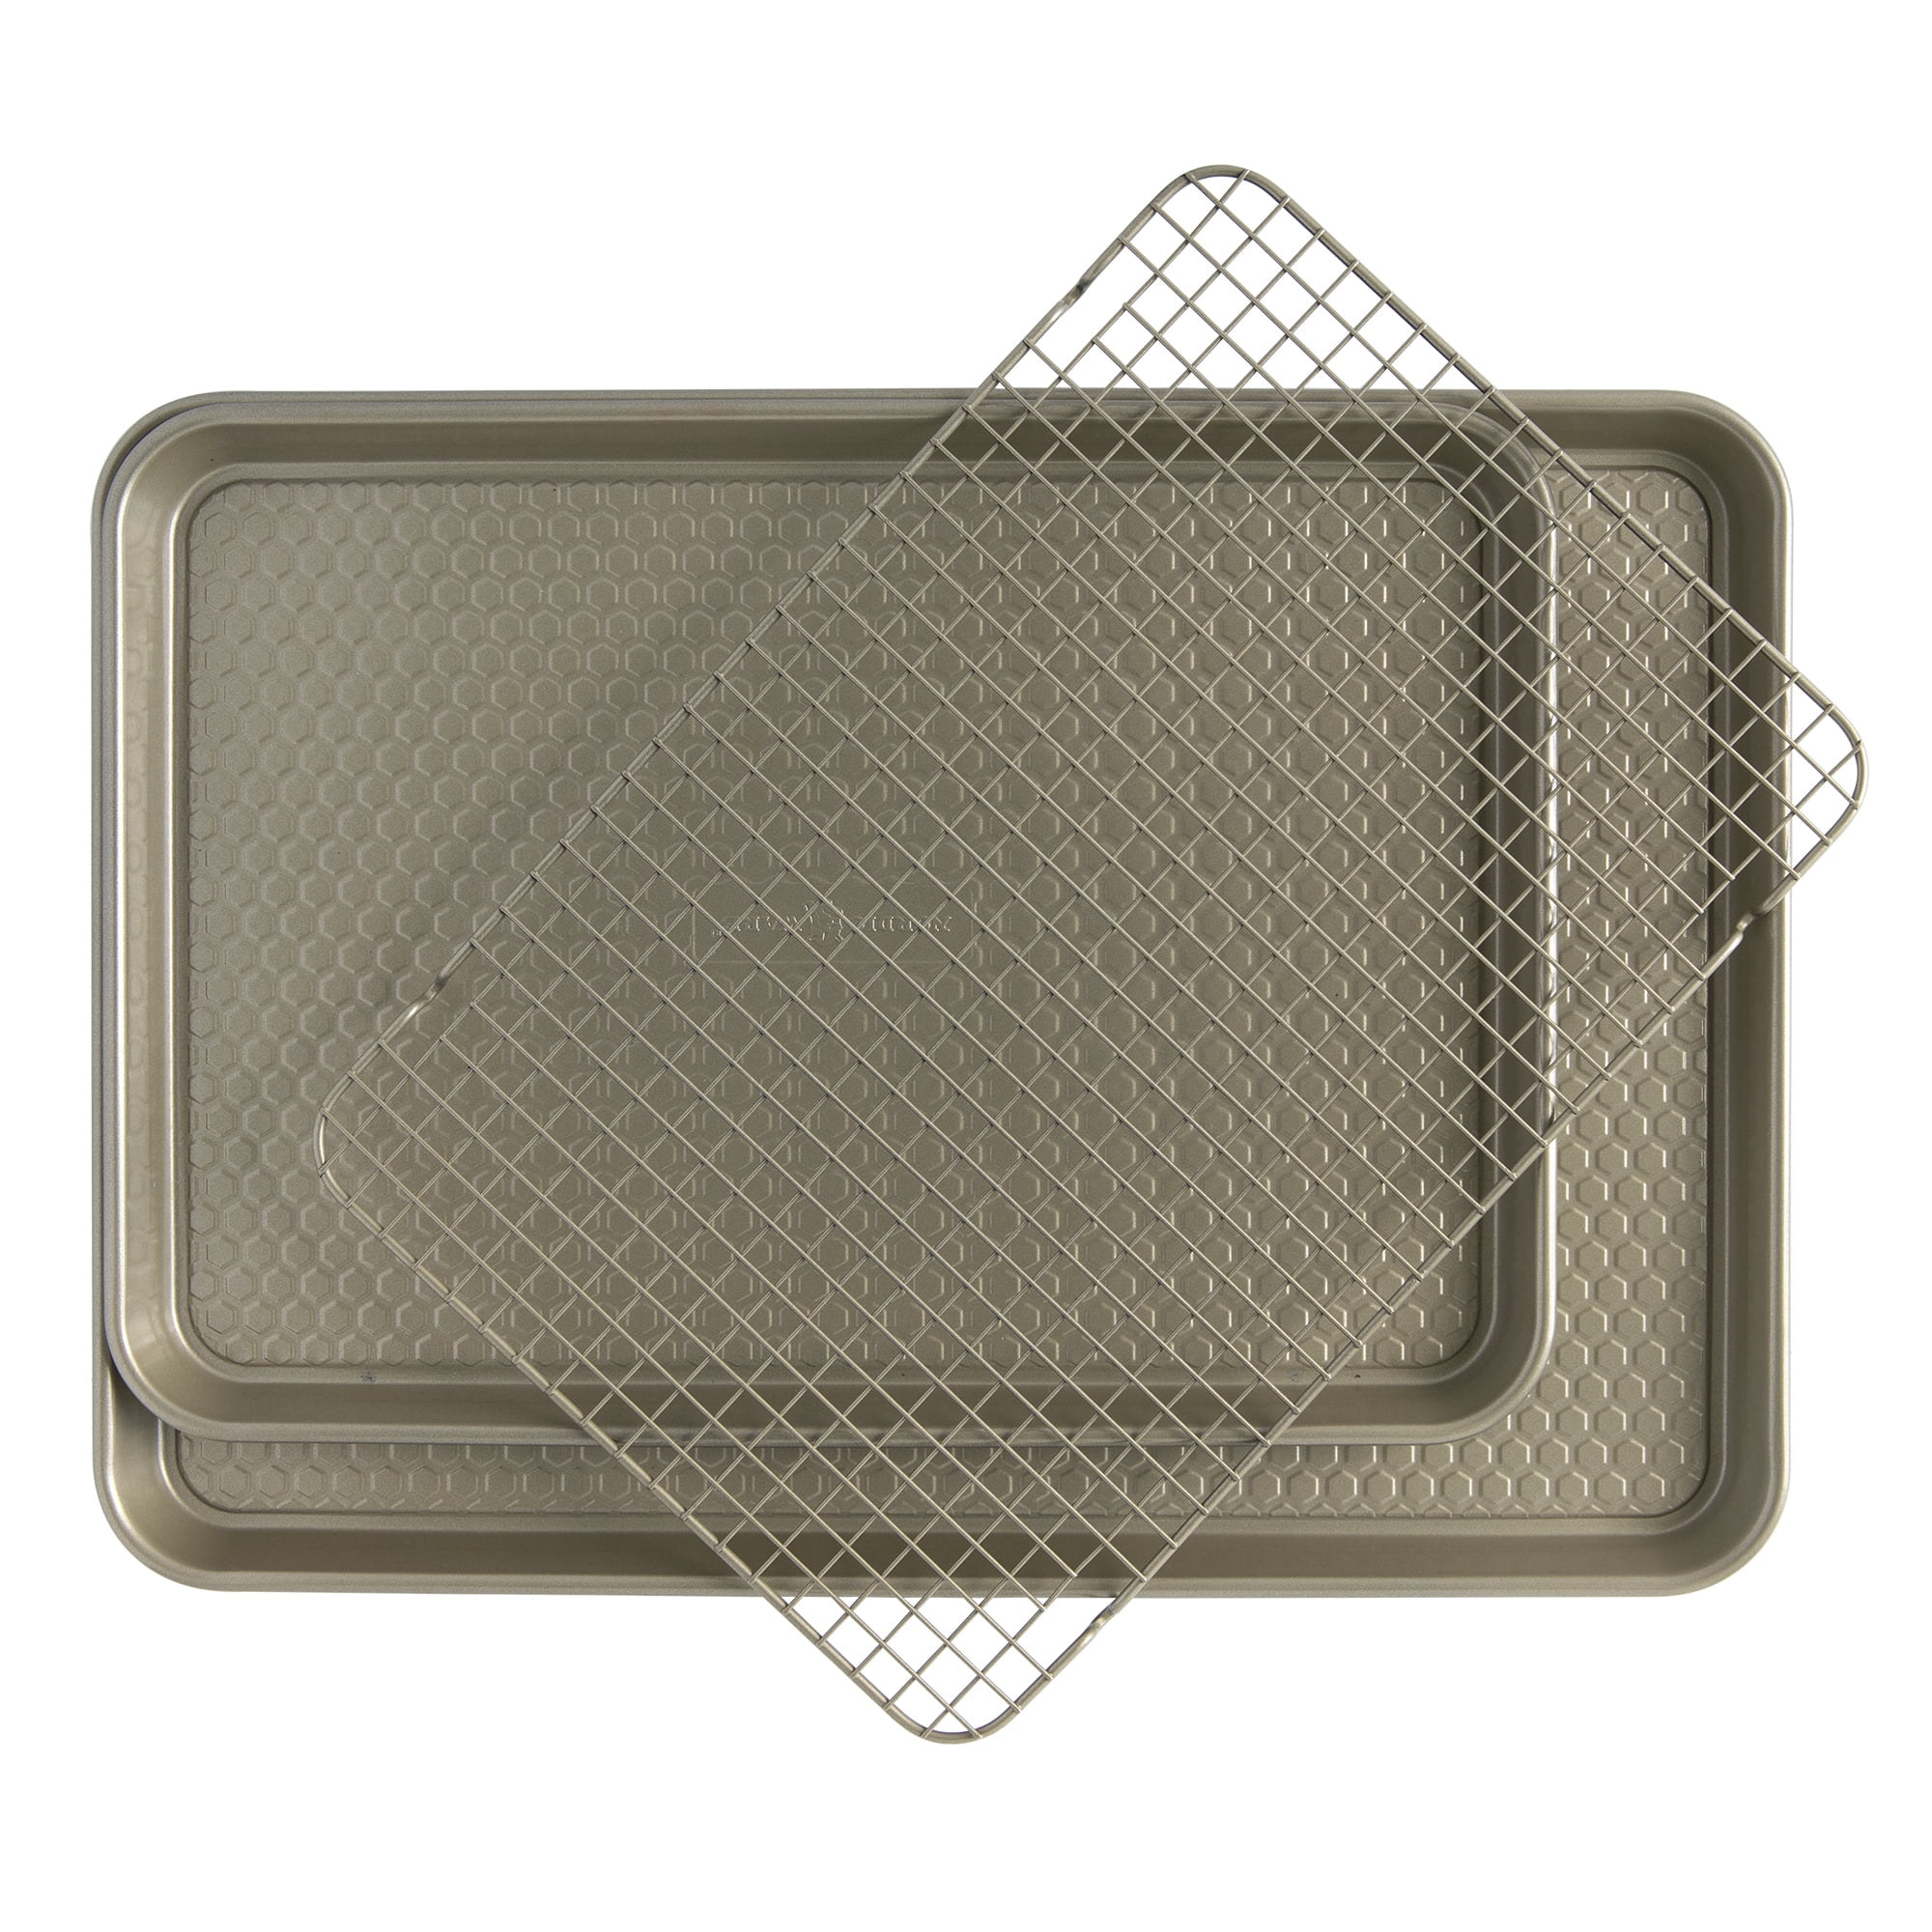 Nordic Ware Baking and Cooling Rack Set- Gold, 3 Pieces - Kroger